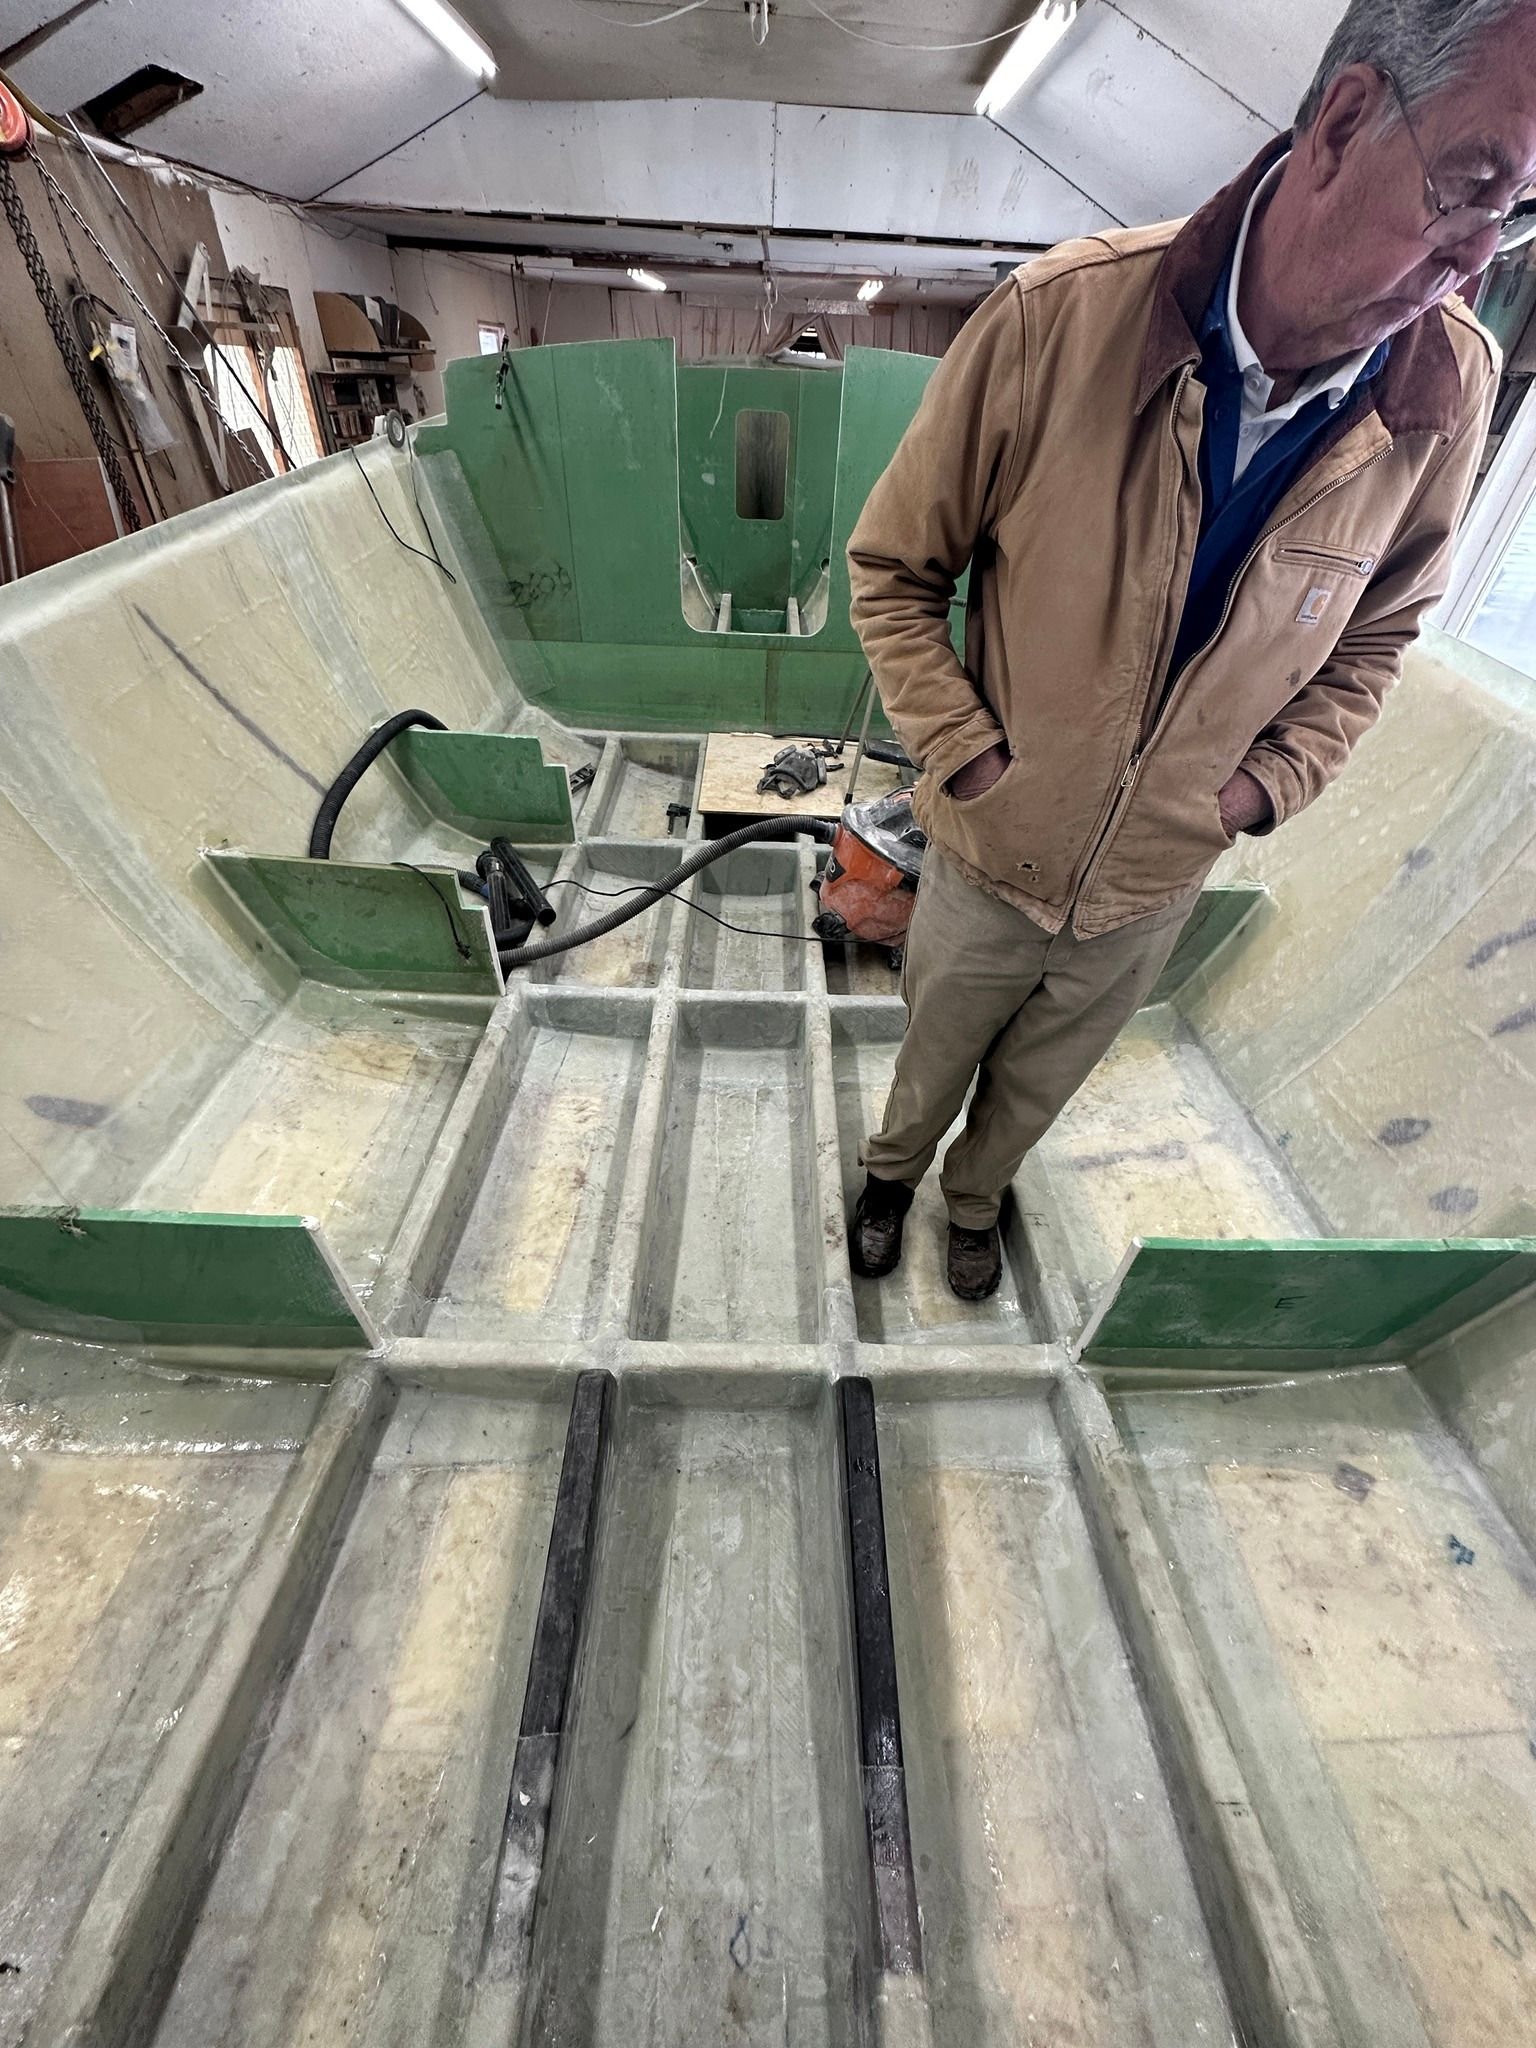    Bruce Dyson stands in the boat with a fully fiberglassed interior hull, the hull structural framework complete, and forward bulkheads and deck supports in place, March 2023   